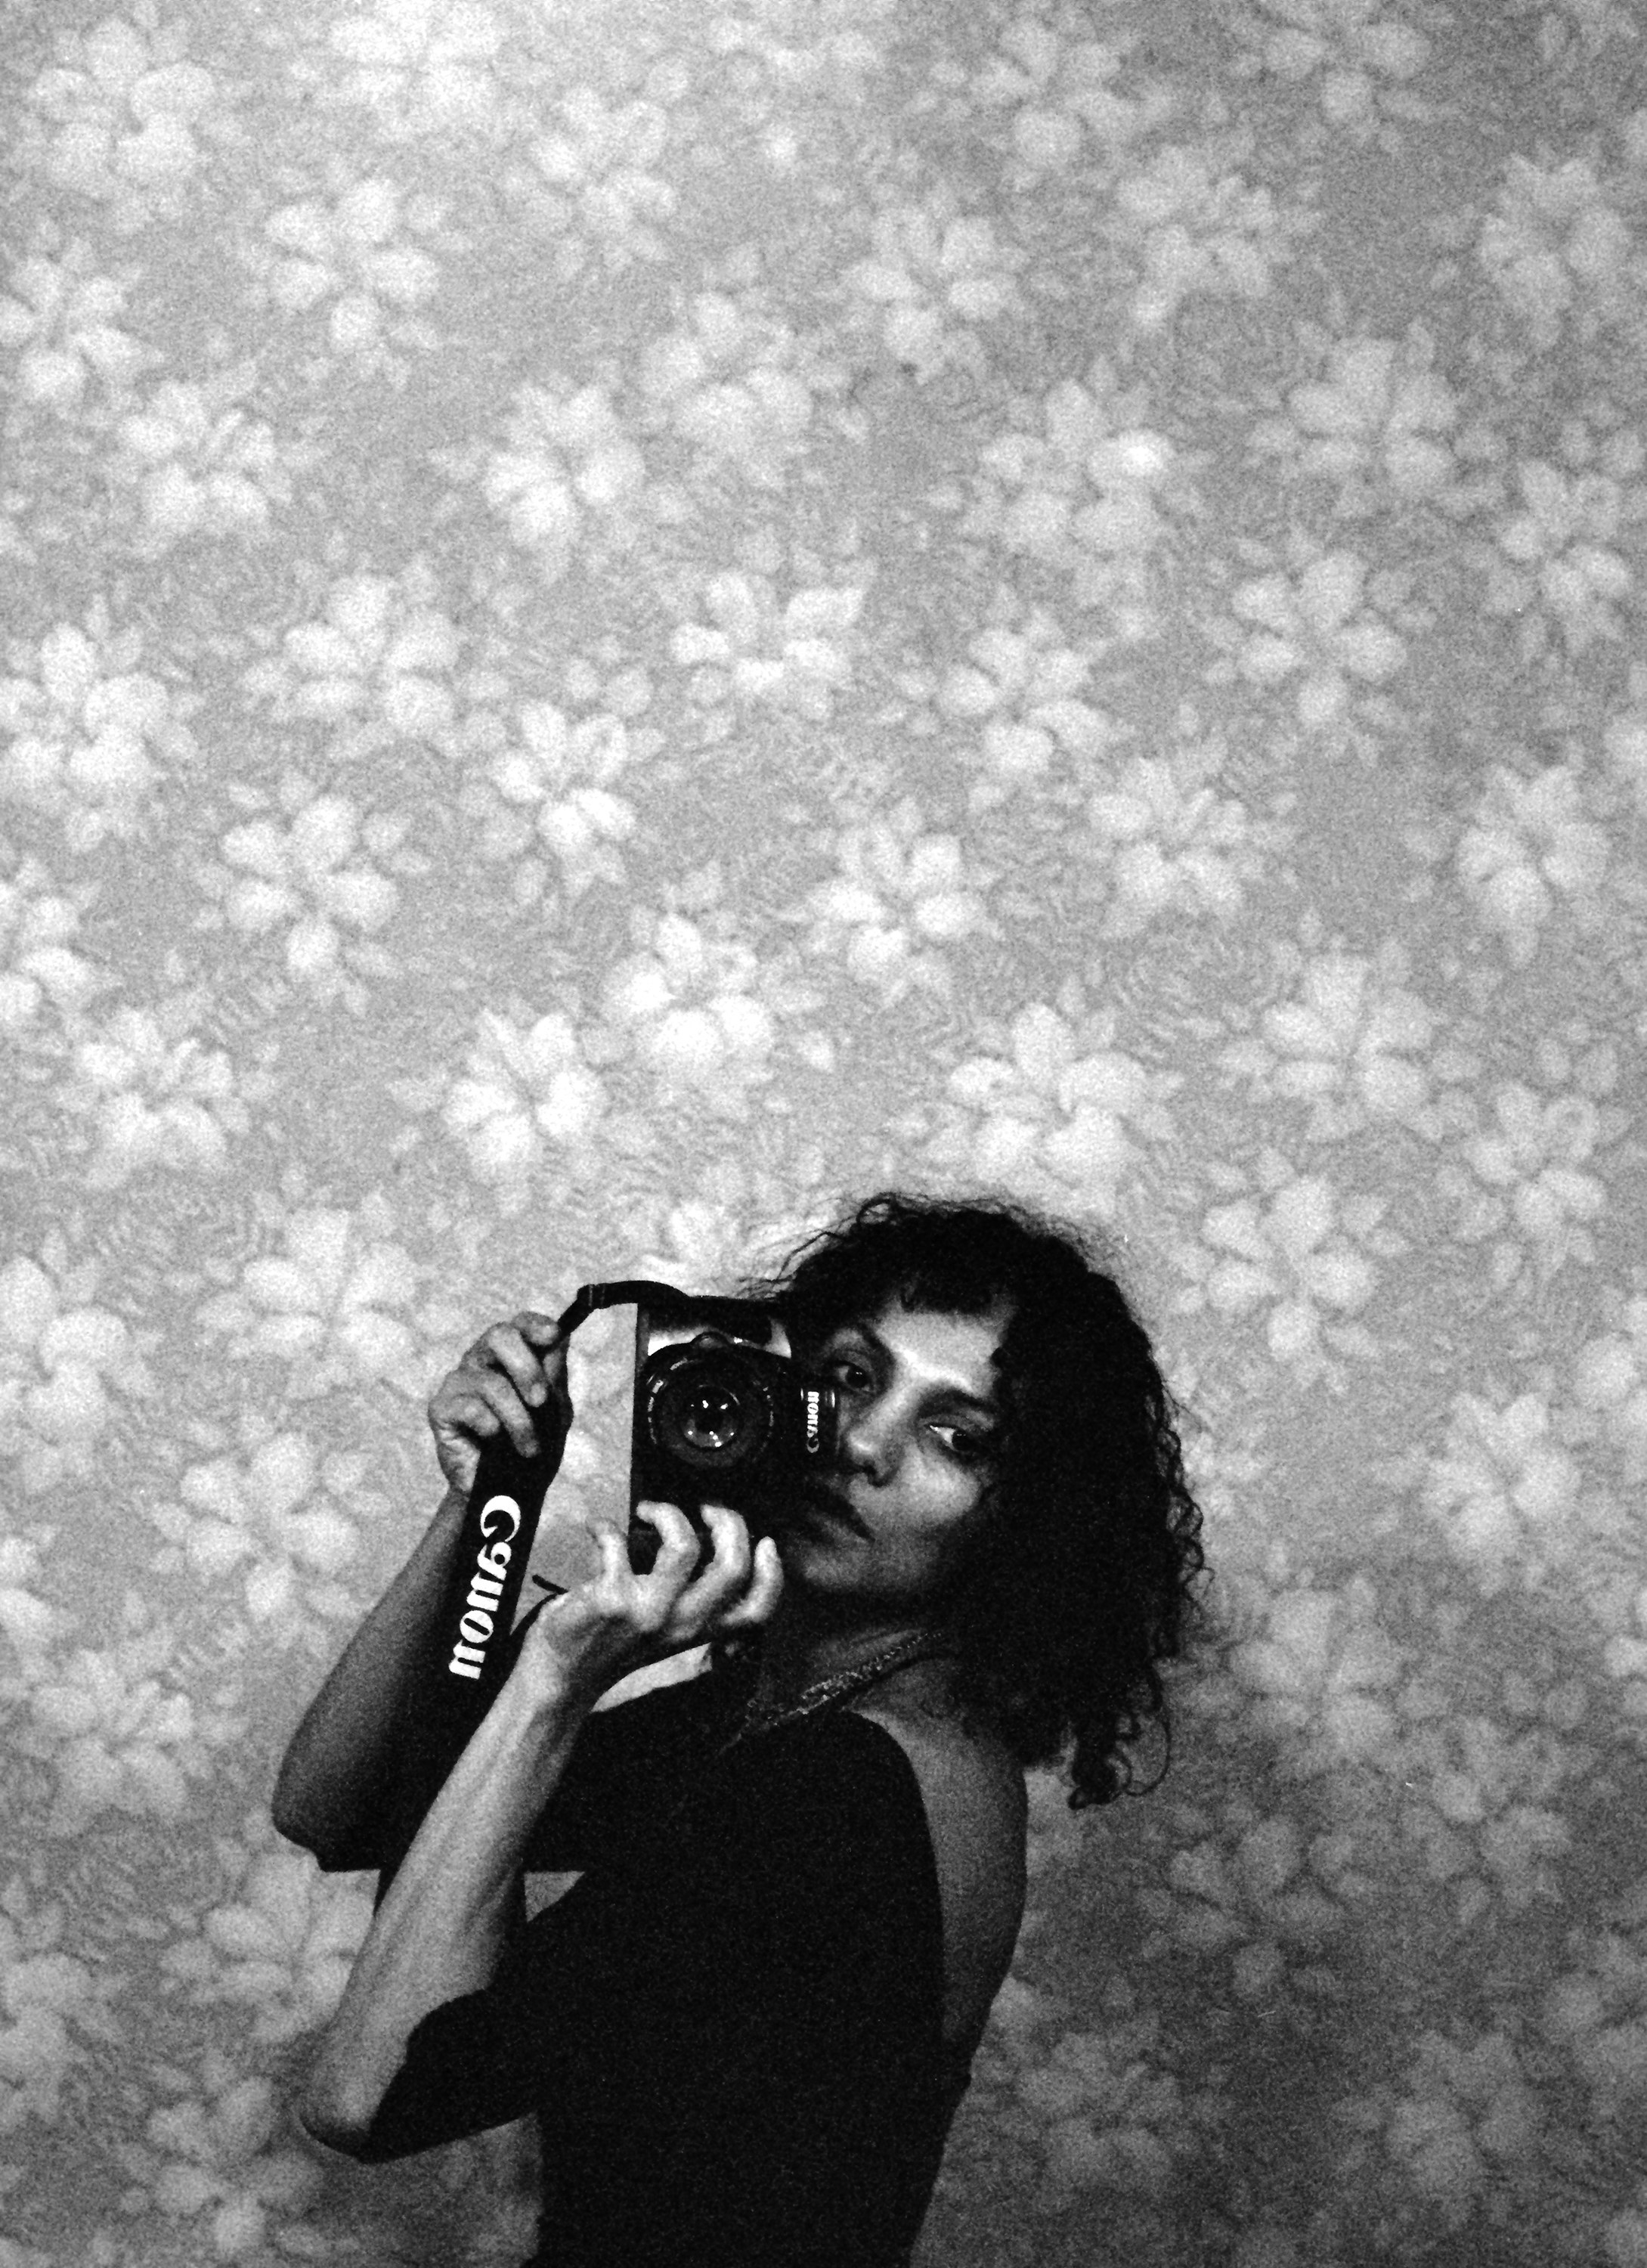 A self-portrait of the artist Ming Smith with a Canon camera in front of a floral wallpaper background